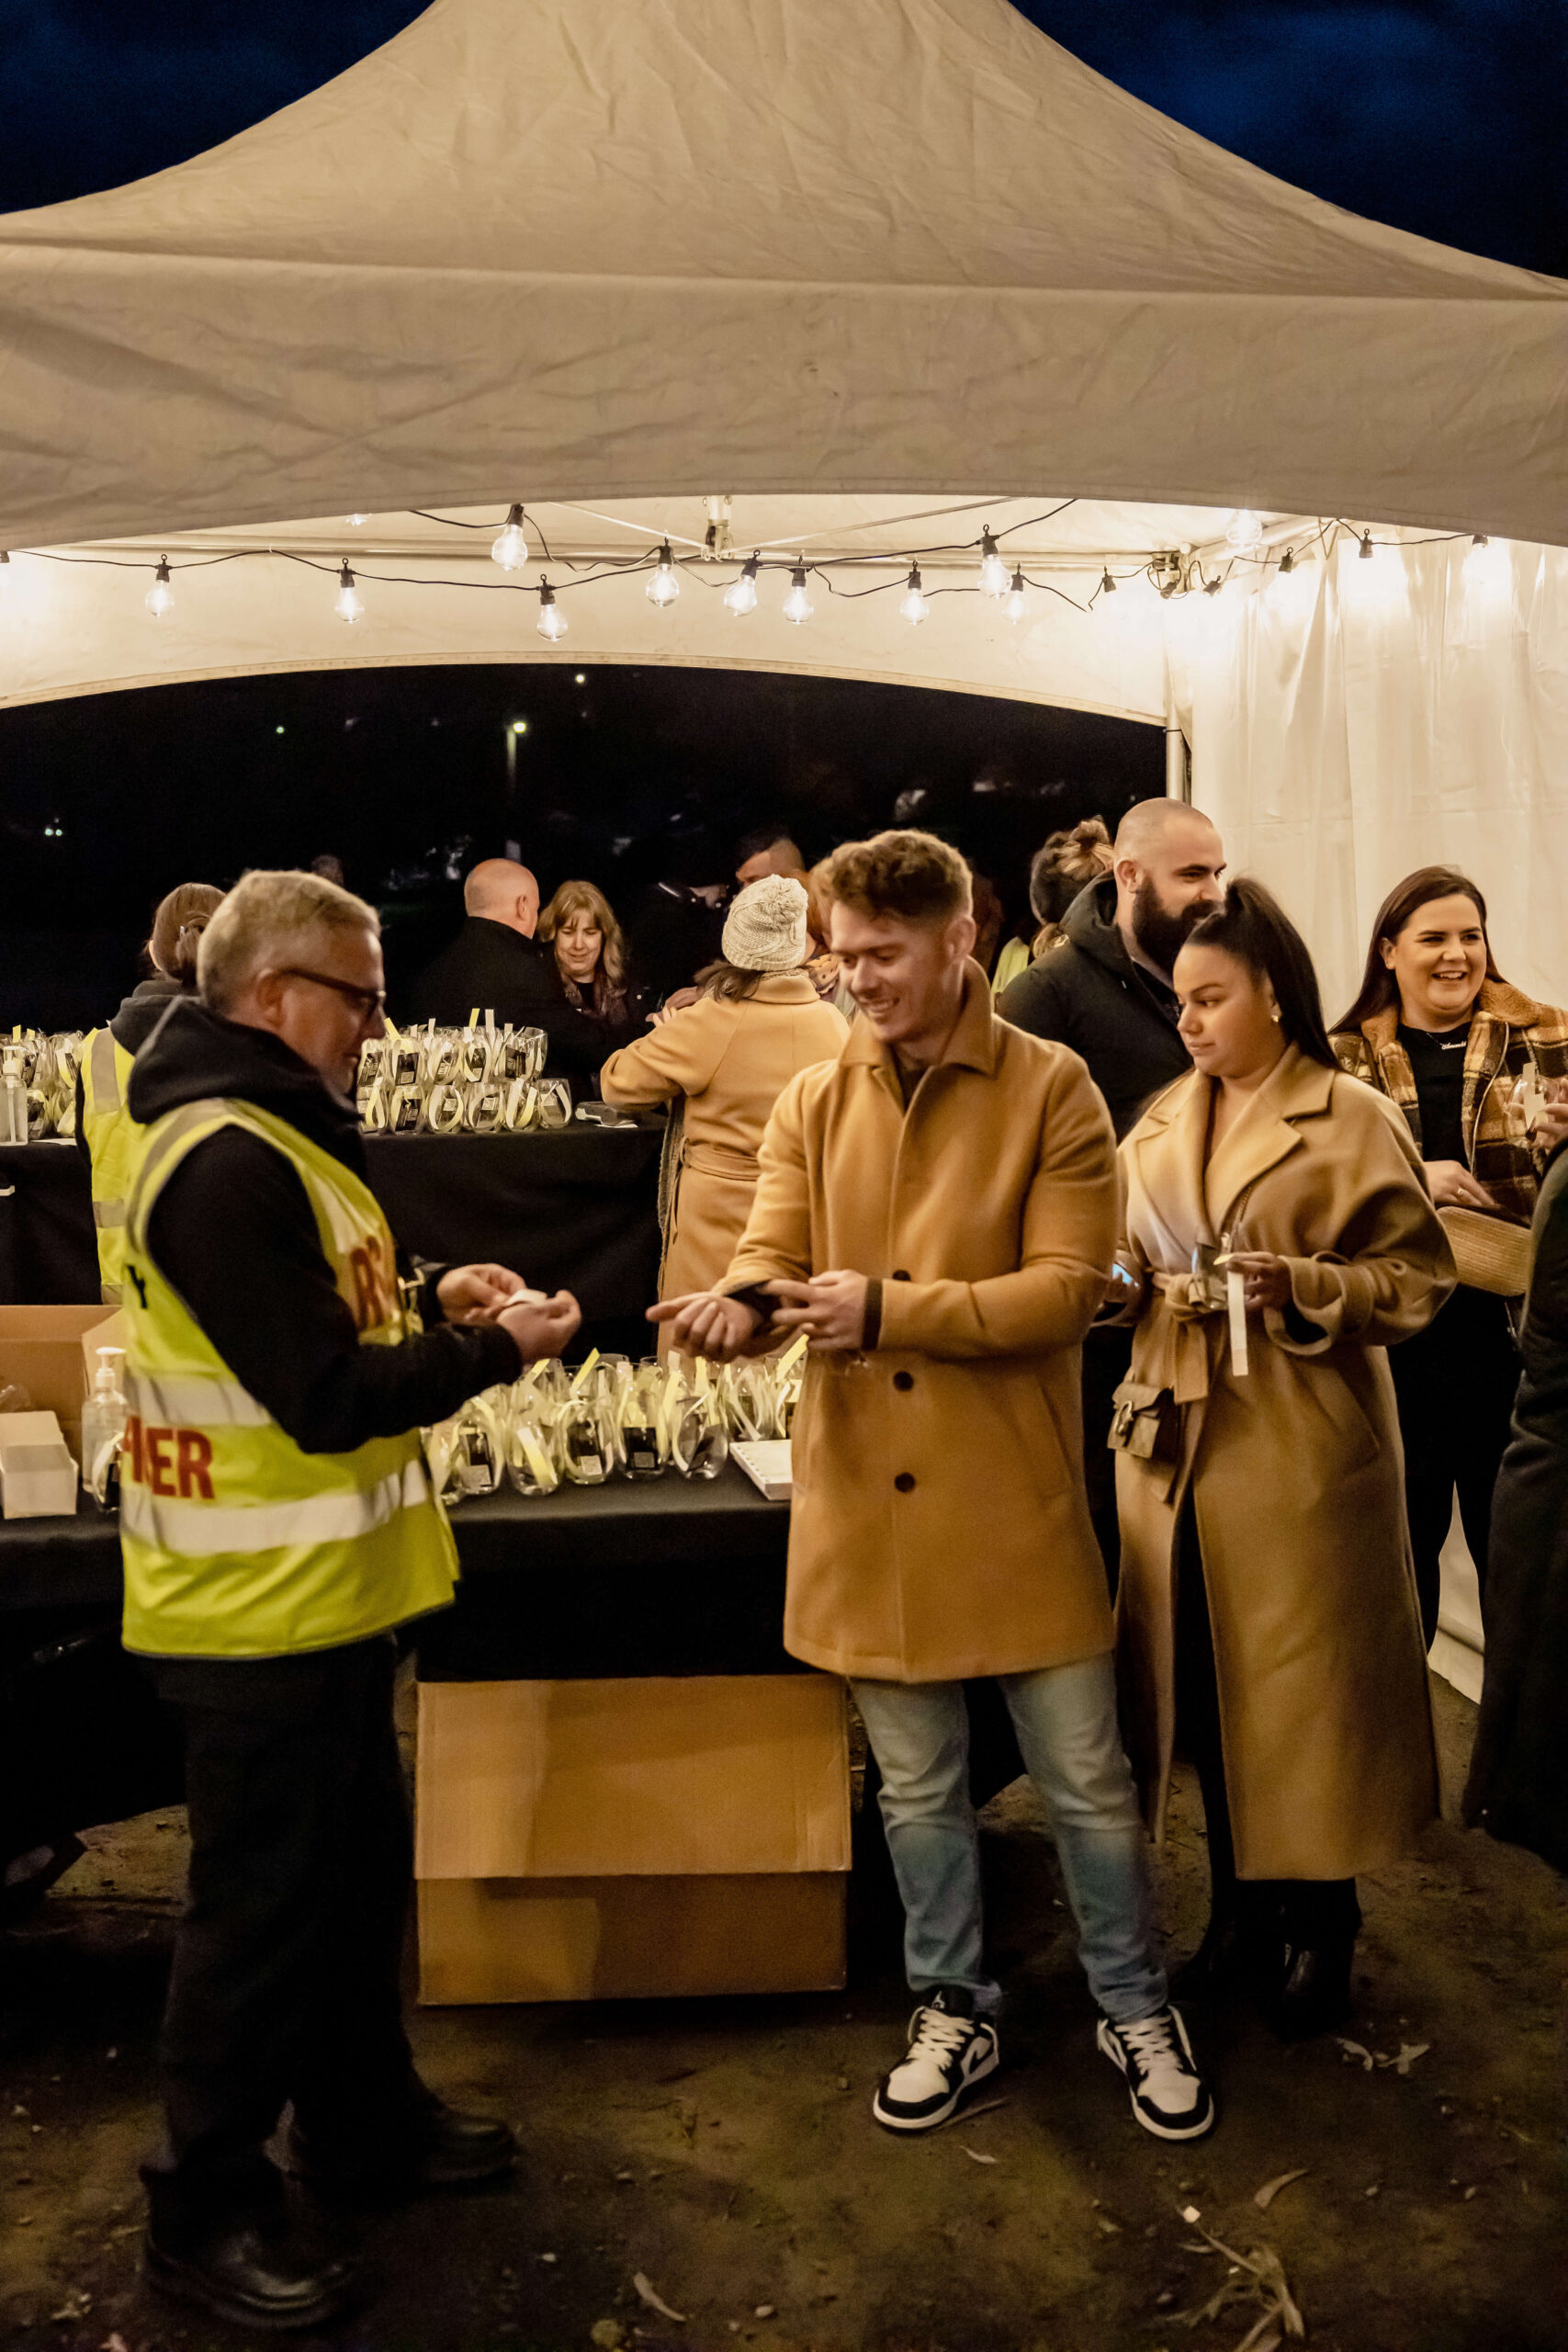 Security welcomes attendees to Fireside Winter Twilight Market